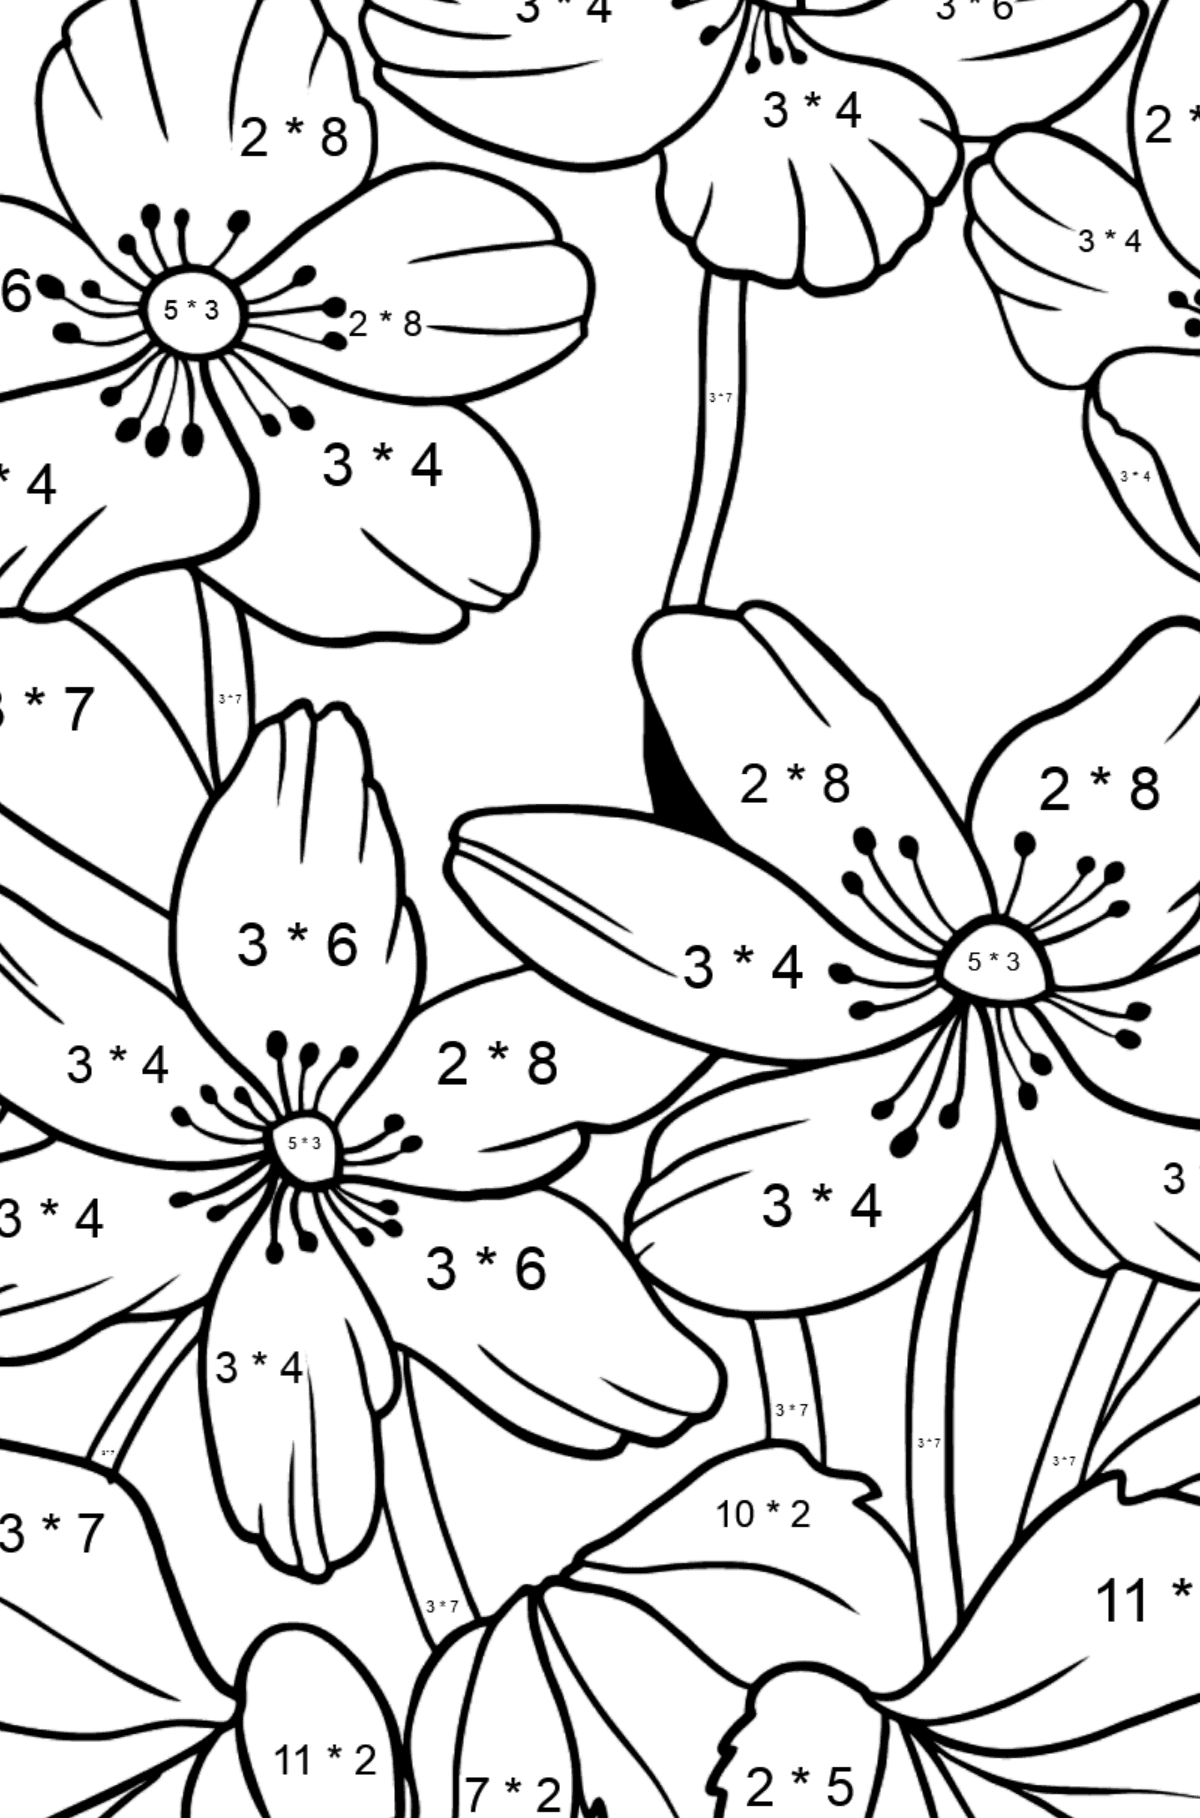 Flower Coloring Page - A Windflower with Yellow Petals - Math Coloring - Multiplication for Kids